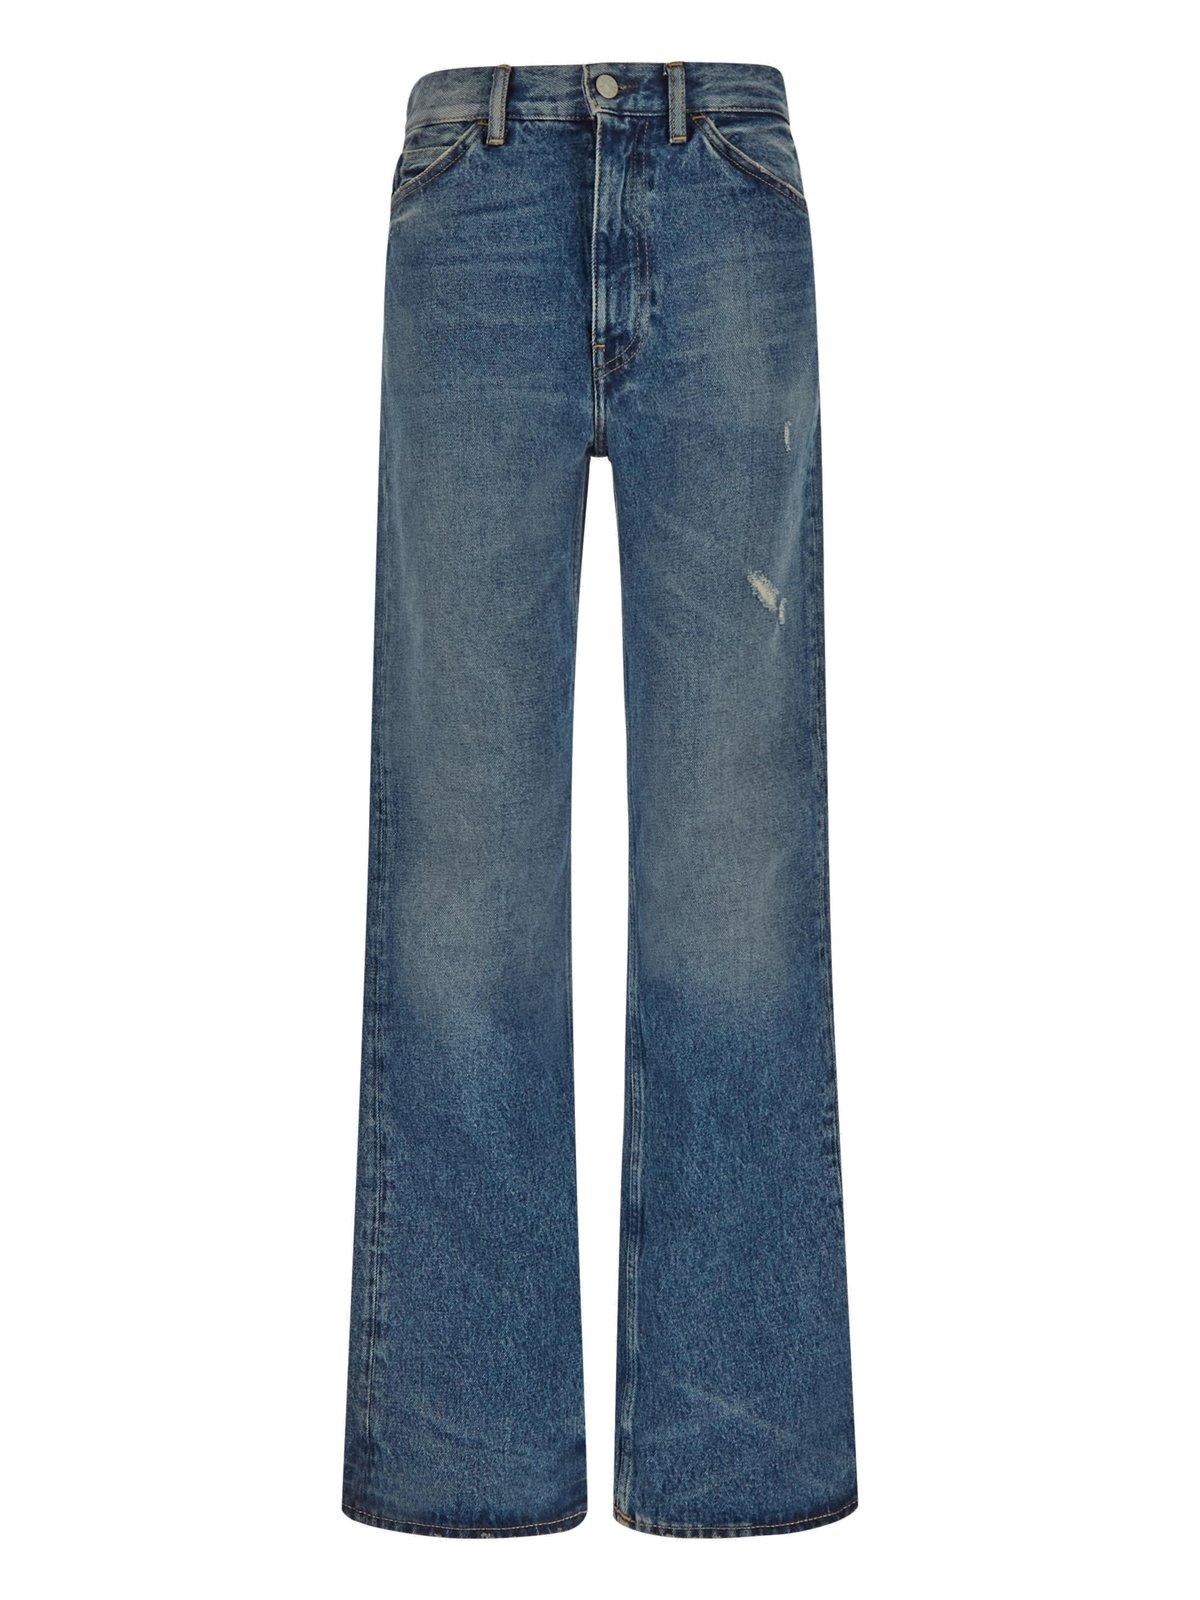 ACNE STUDIOS DISTRESSED MID-RISE JEANS